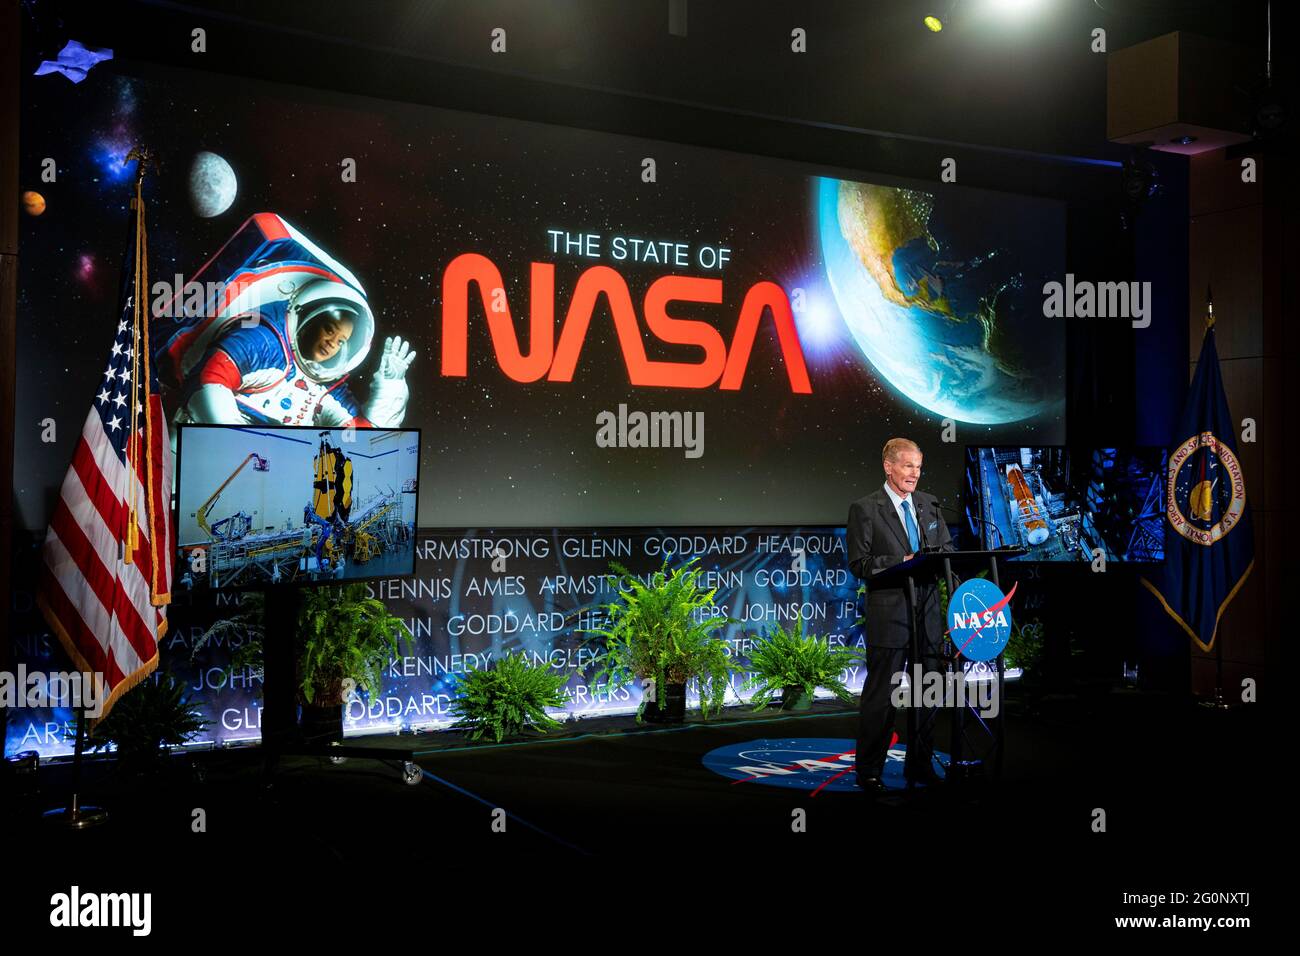 NASA Administrator Bill Nelson speaks during a 'State of NASA' address, as he announces the new DAVINCI+ and VERITAS space missions to study Venus, at NASA headquarters in Washington, U.S., June 2, 2021. REUTERS/Al Drago Stock Photo